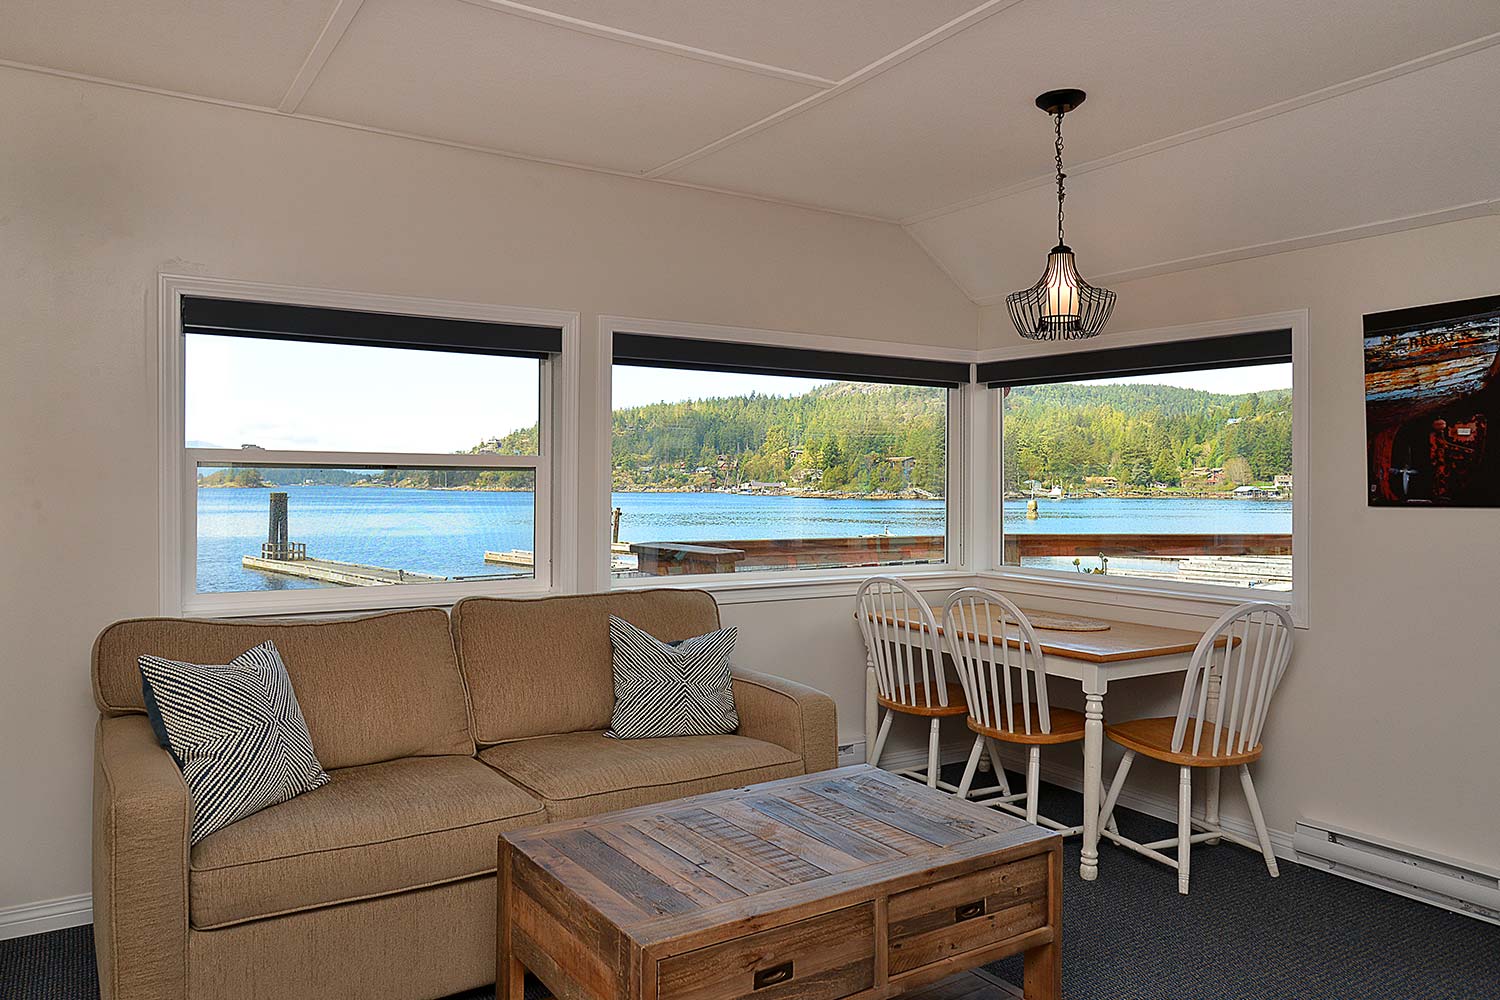 The Prawn Palace living room has a pull-out sofa bed and a coffee table, and features incredible views of Pender Harbour.